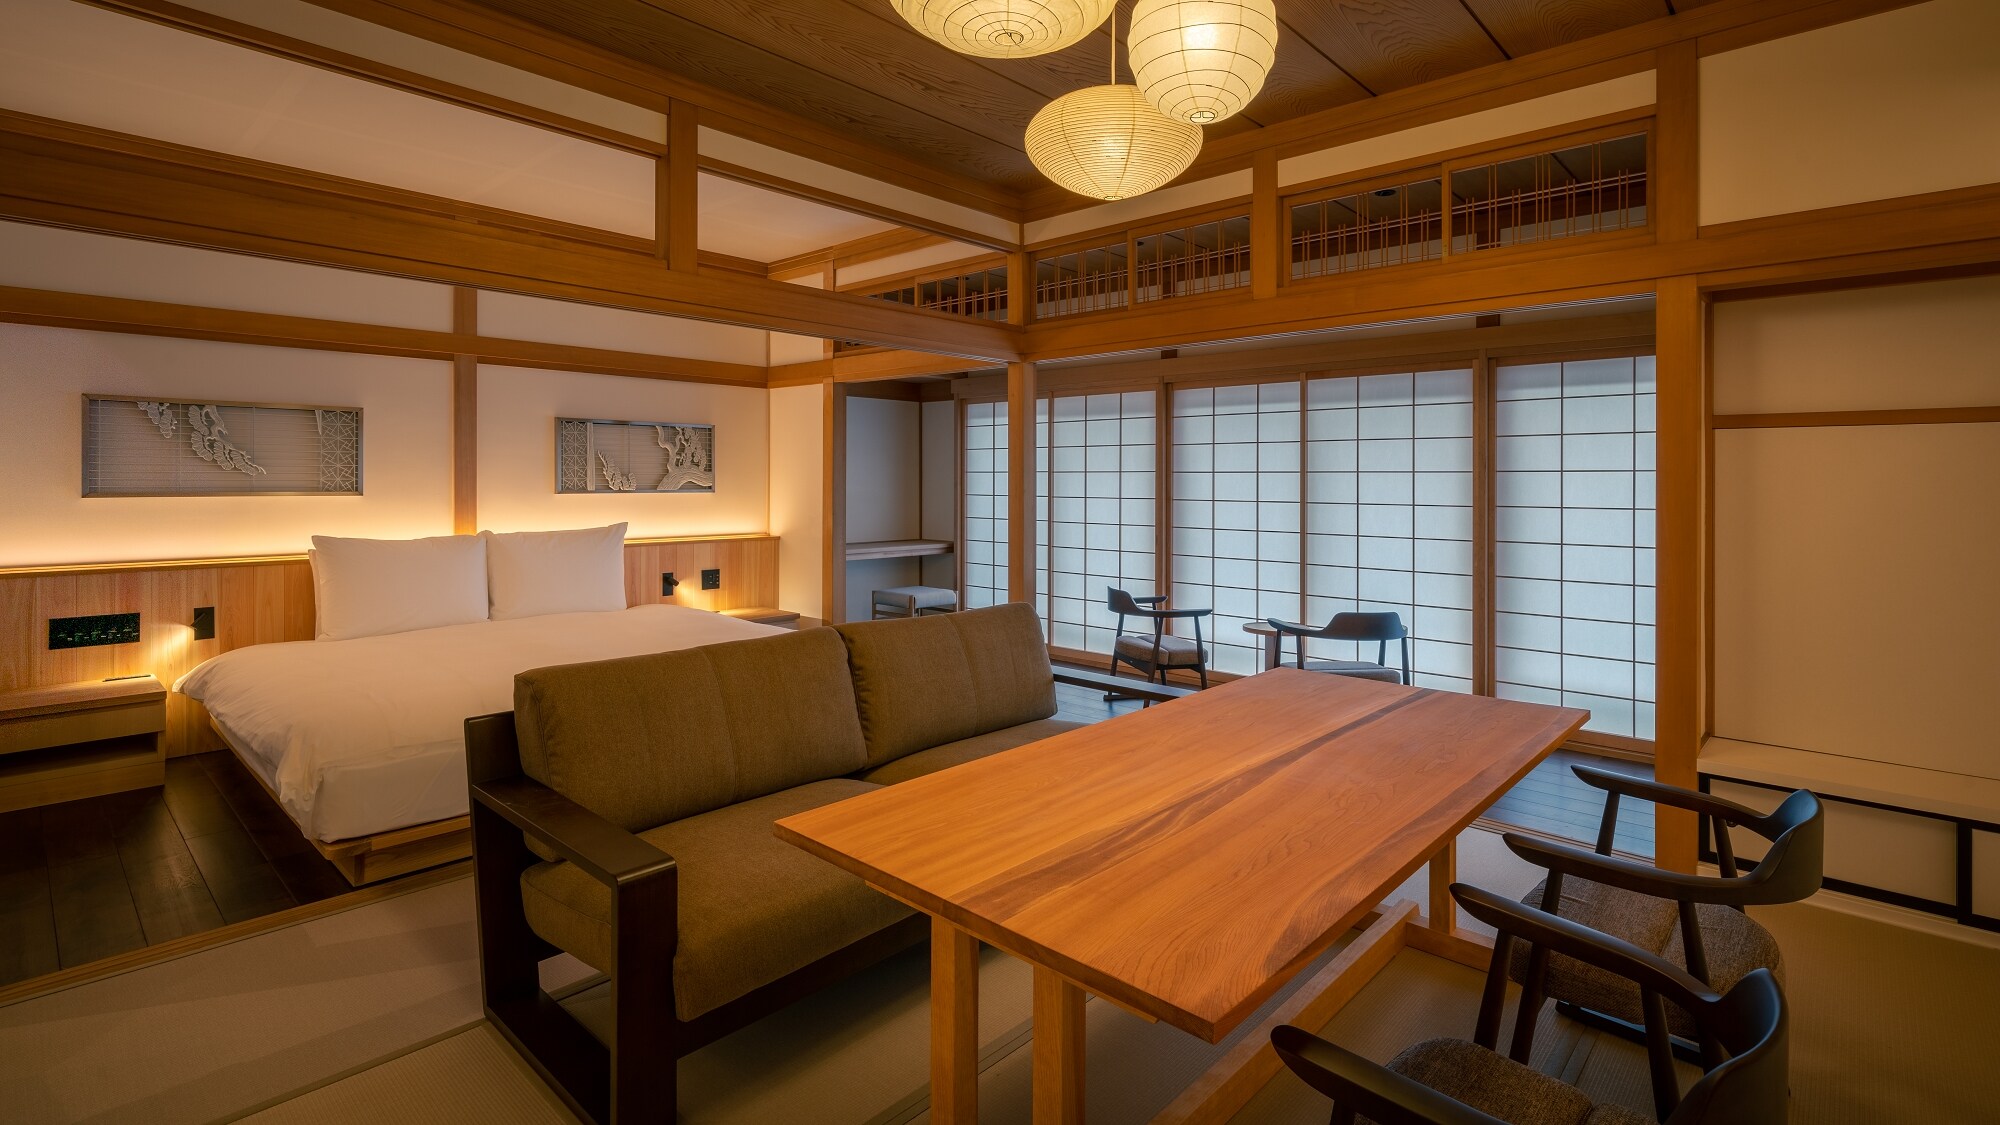 [Annex Shimamoya] Hyakujusan / Halle space on the second floor of the front / With a semi-open-air bath